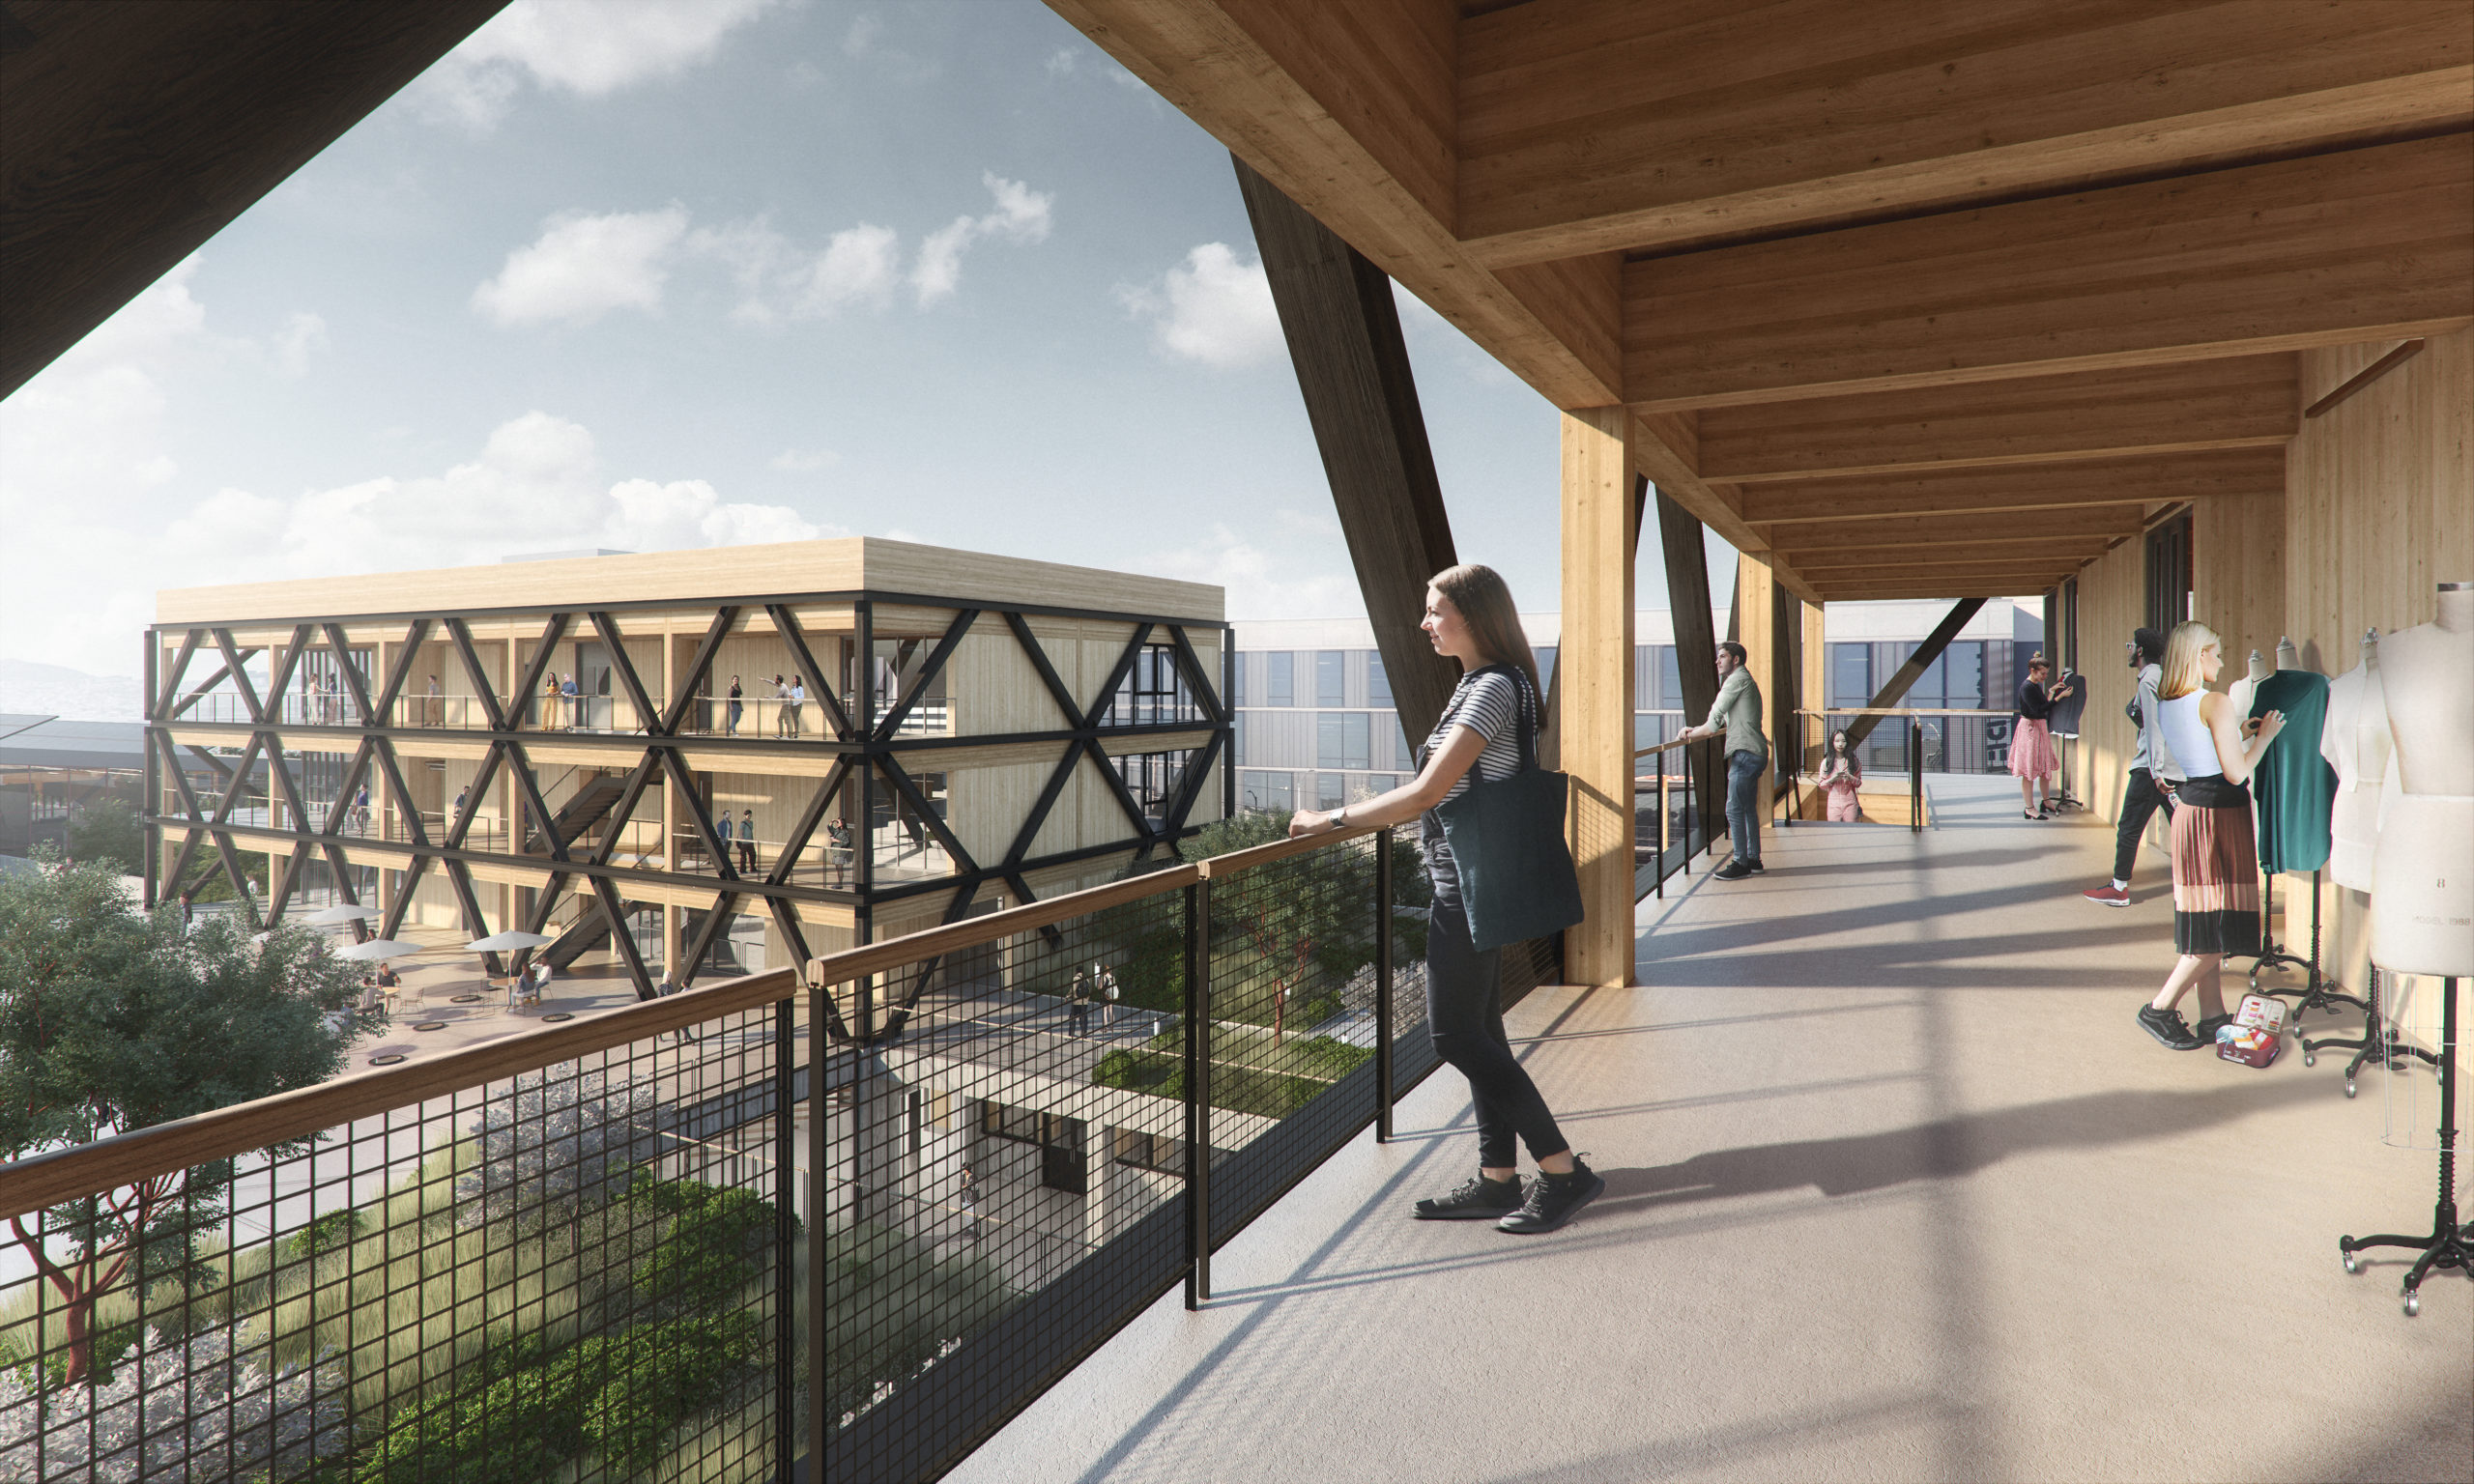 CCA campus mass timber structures seen from the exposed hallways, rendering by Studio Gang and Kilograph